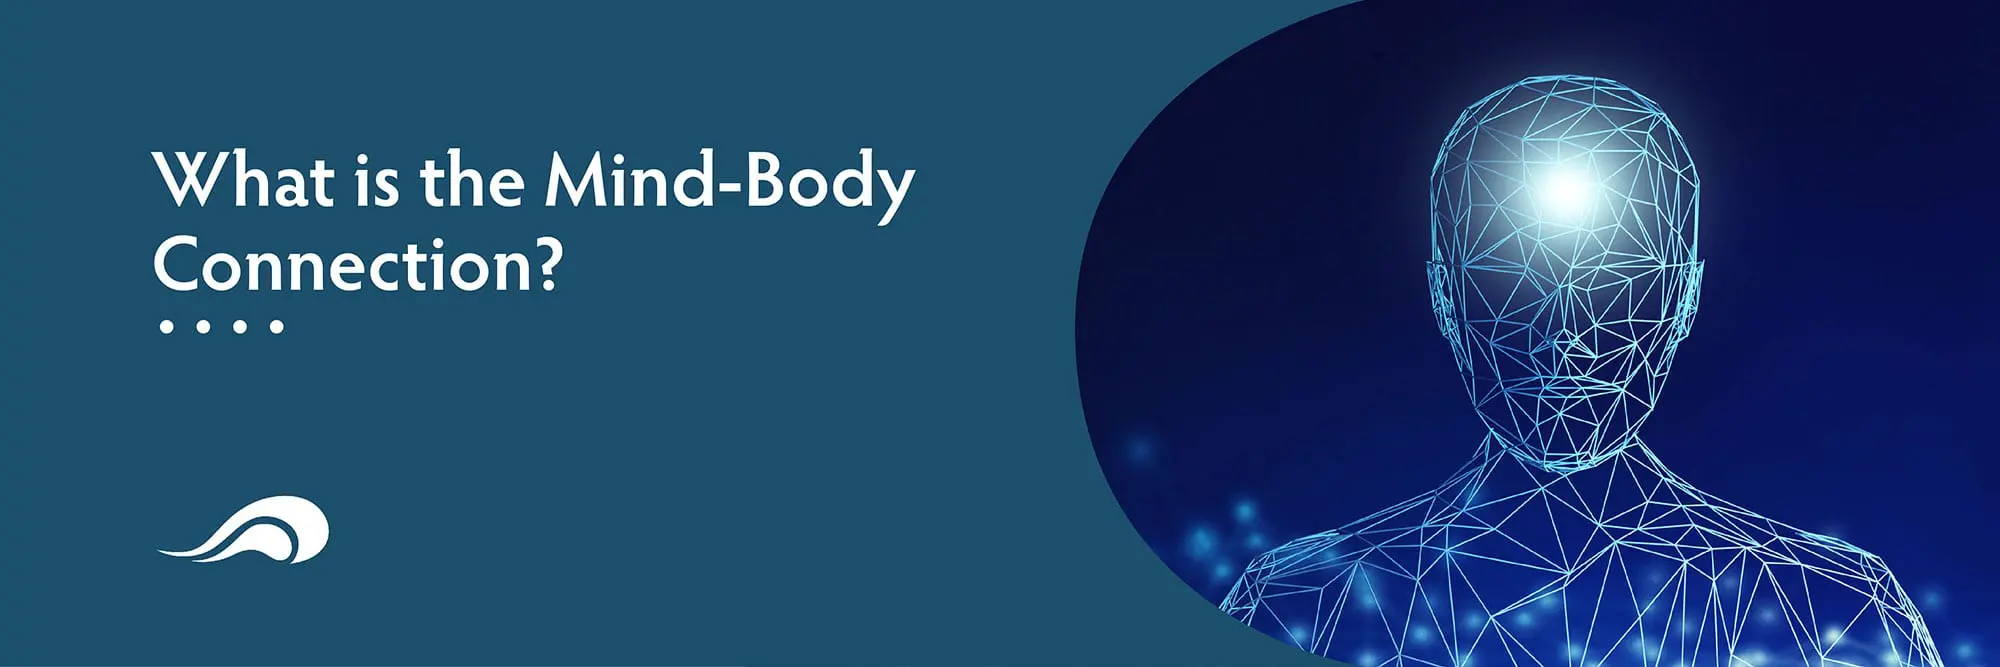 What-is-the-Mind-Body-Connection.jpg